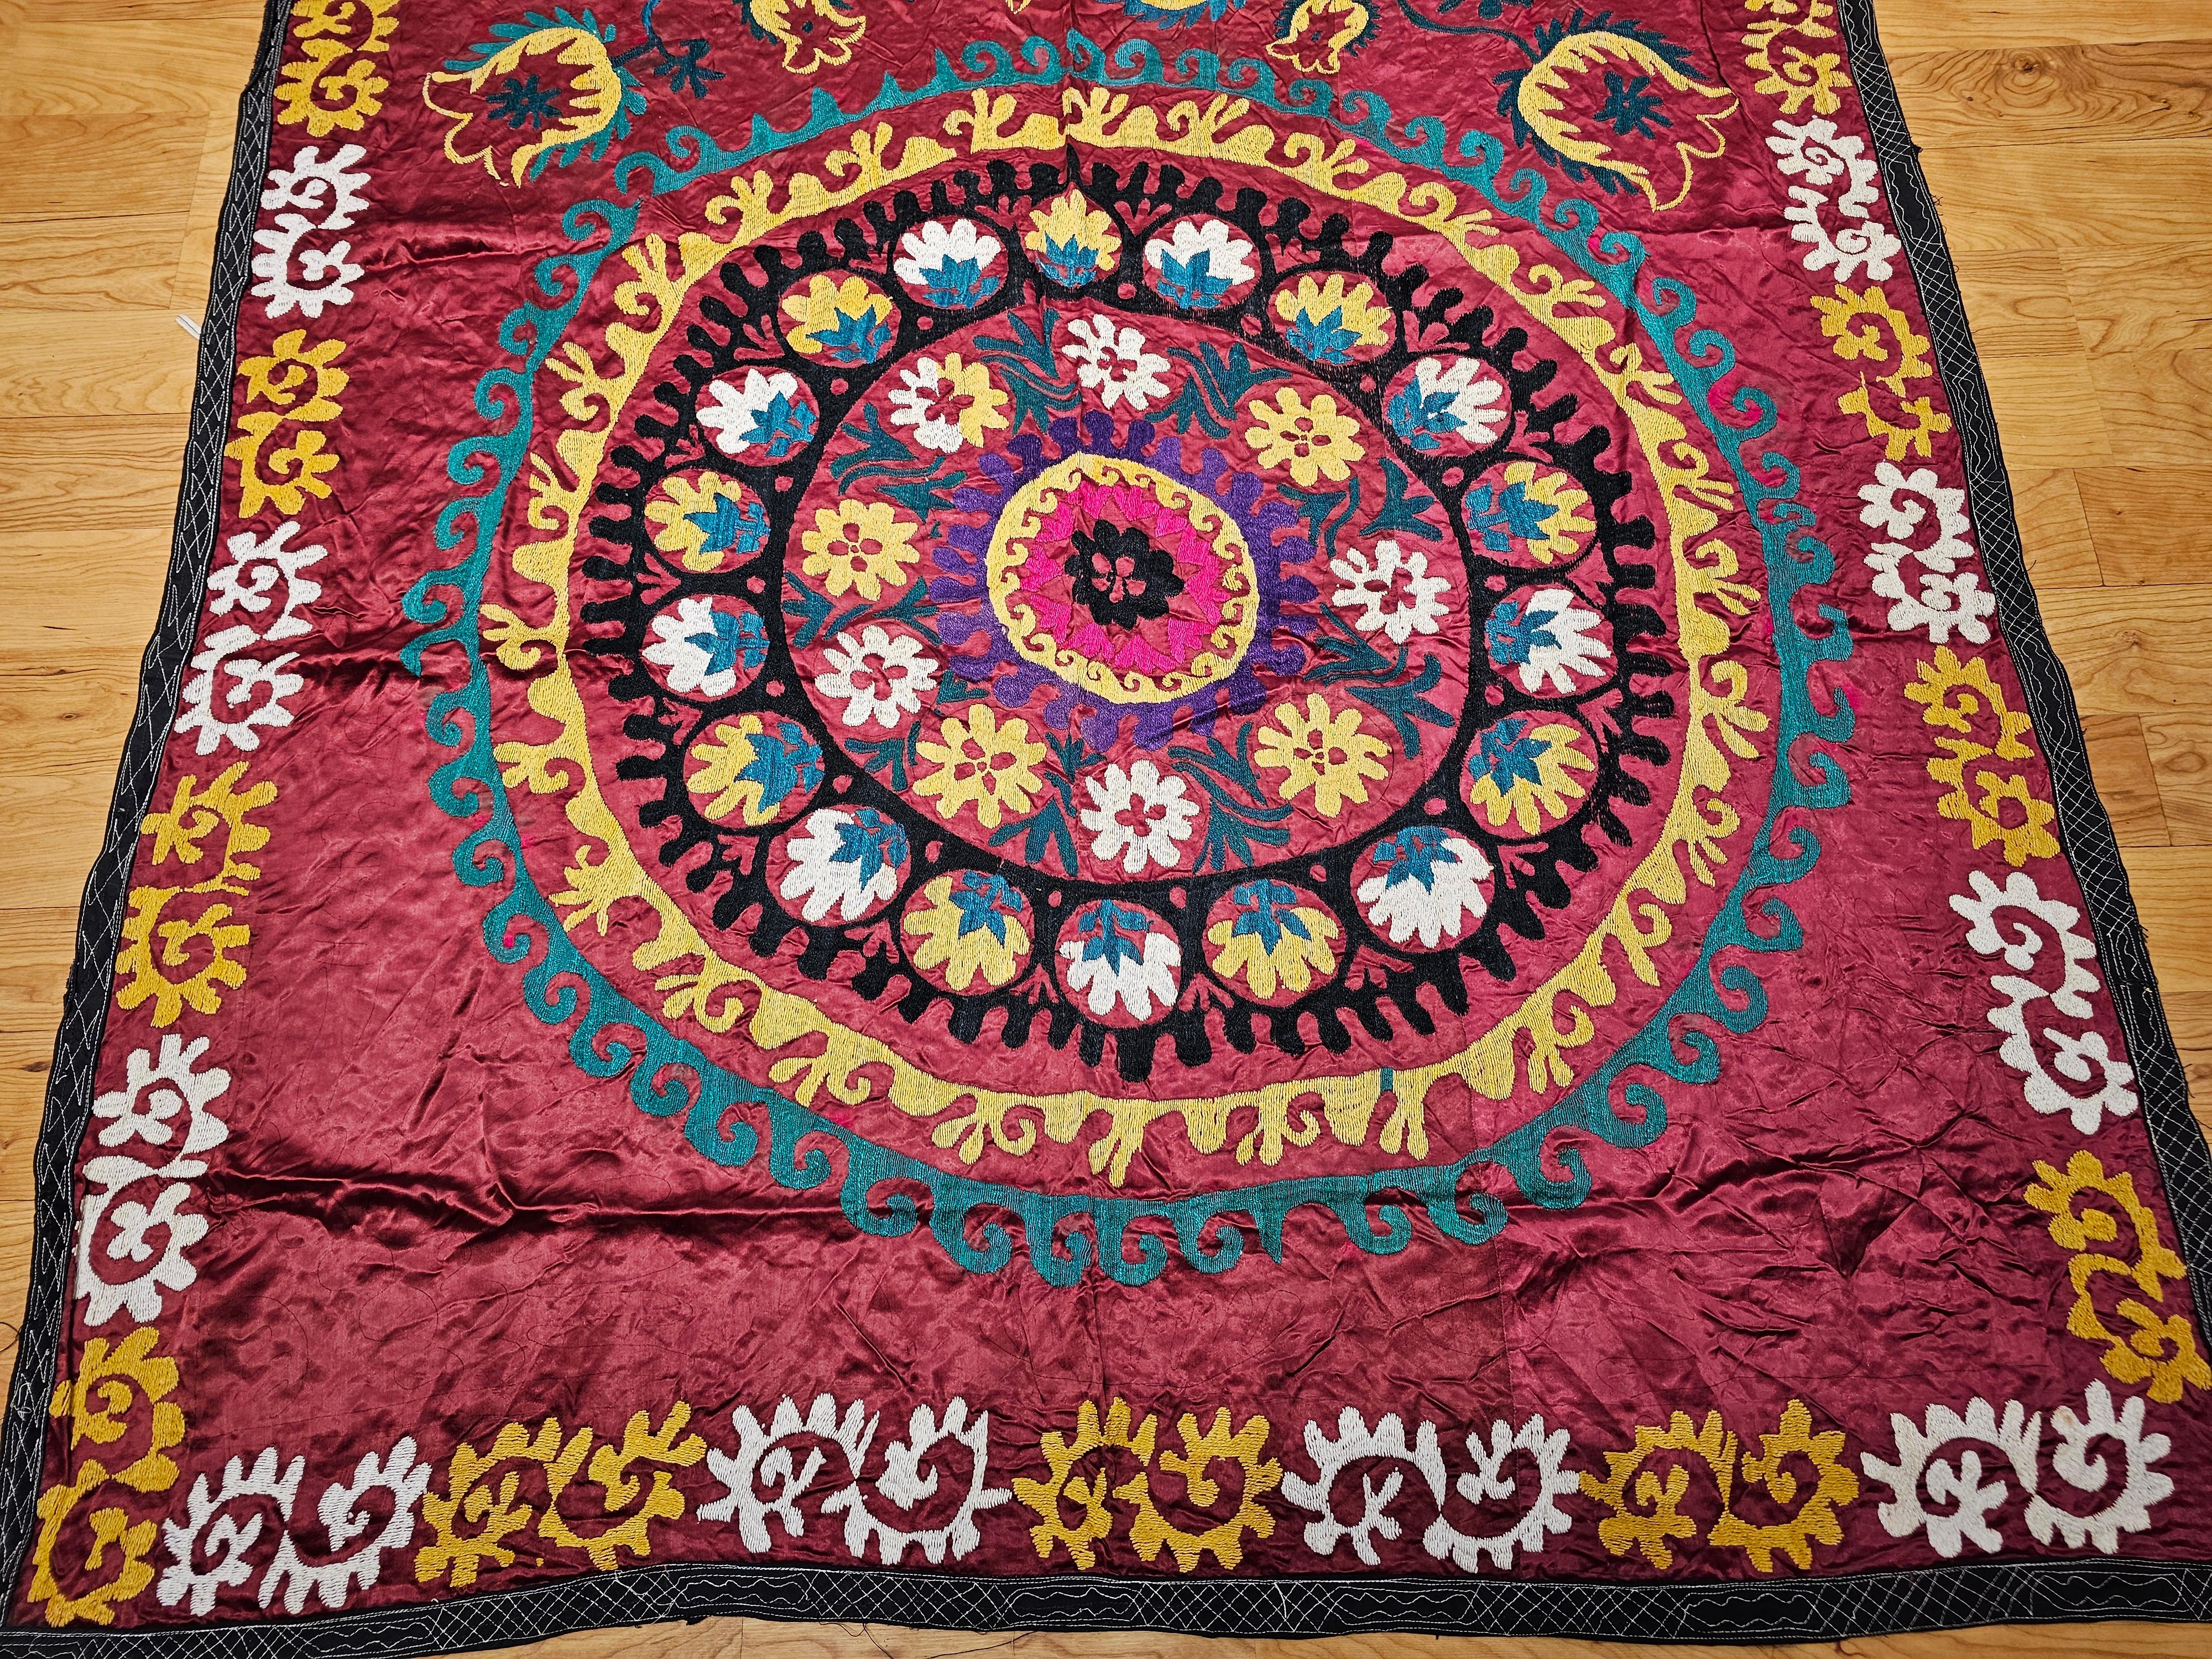 Vintage Uzbek Silk Embroidery Suzani in Red, Turquoise, Ivory, Yellow, Purple In Good Condition For Sale In Barrington, IL